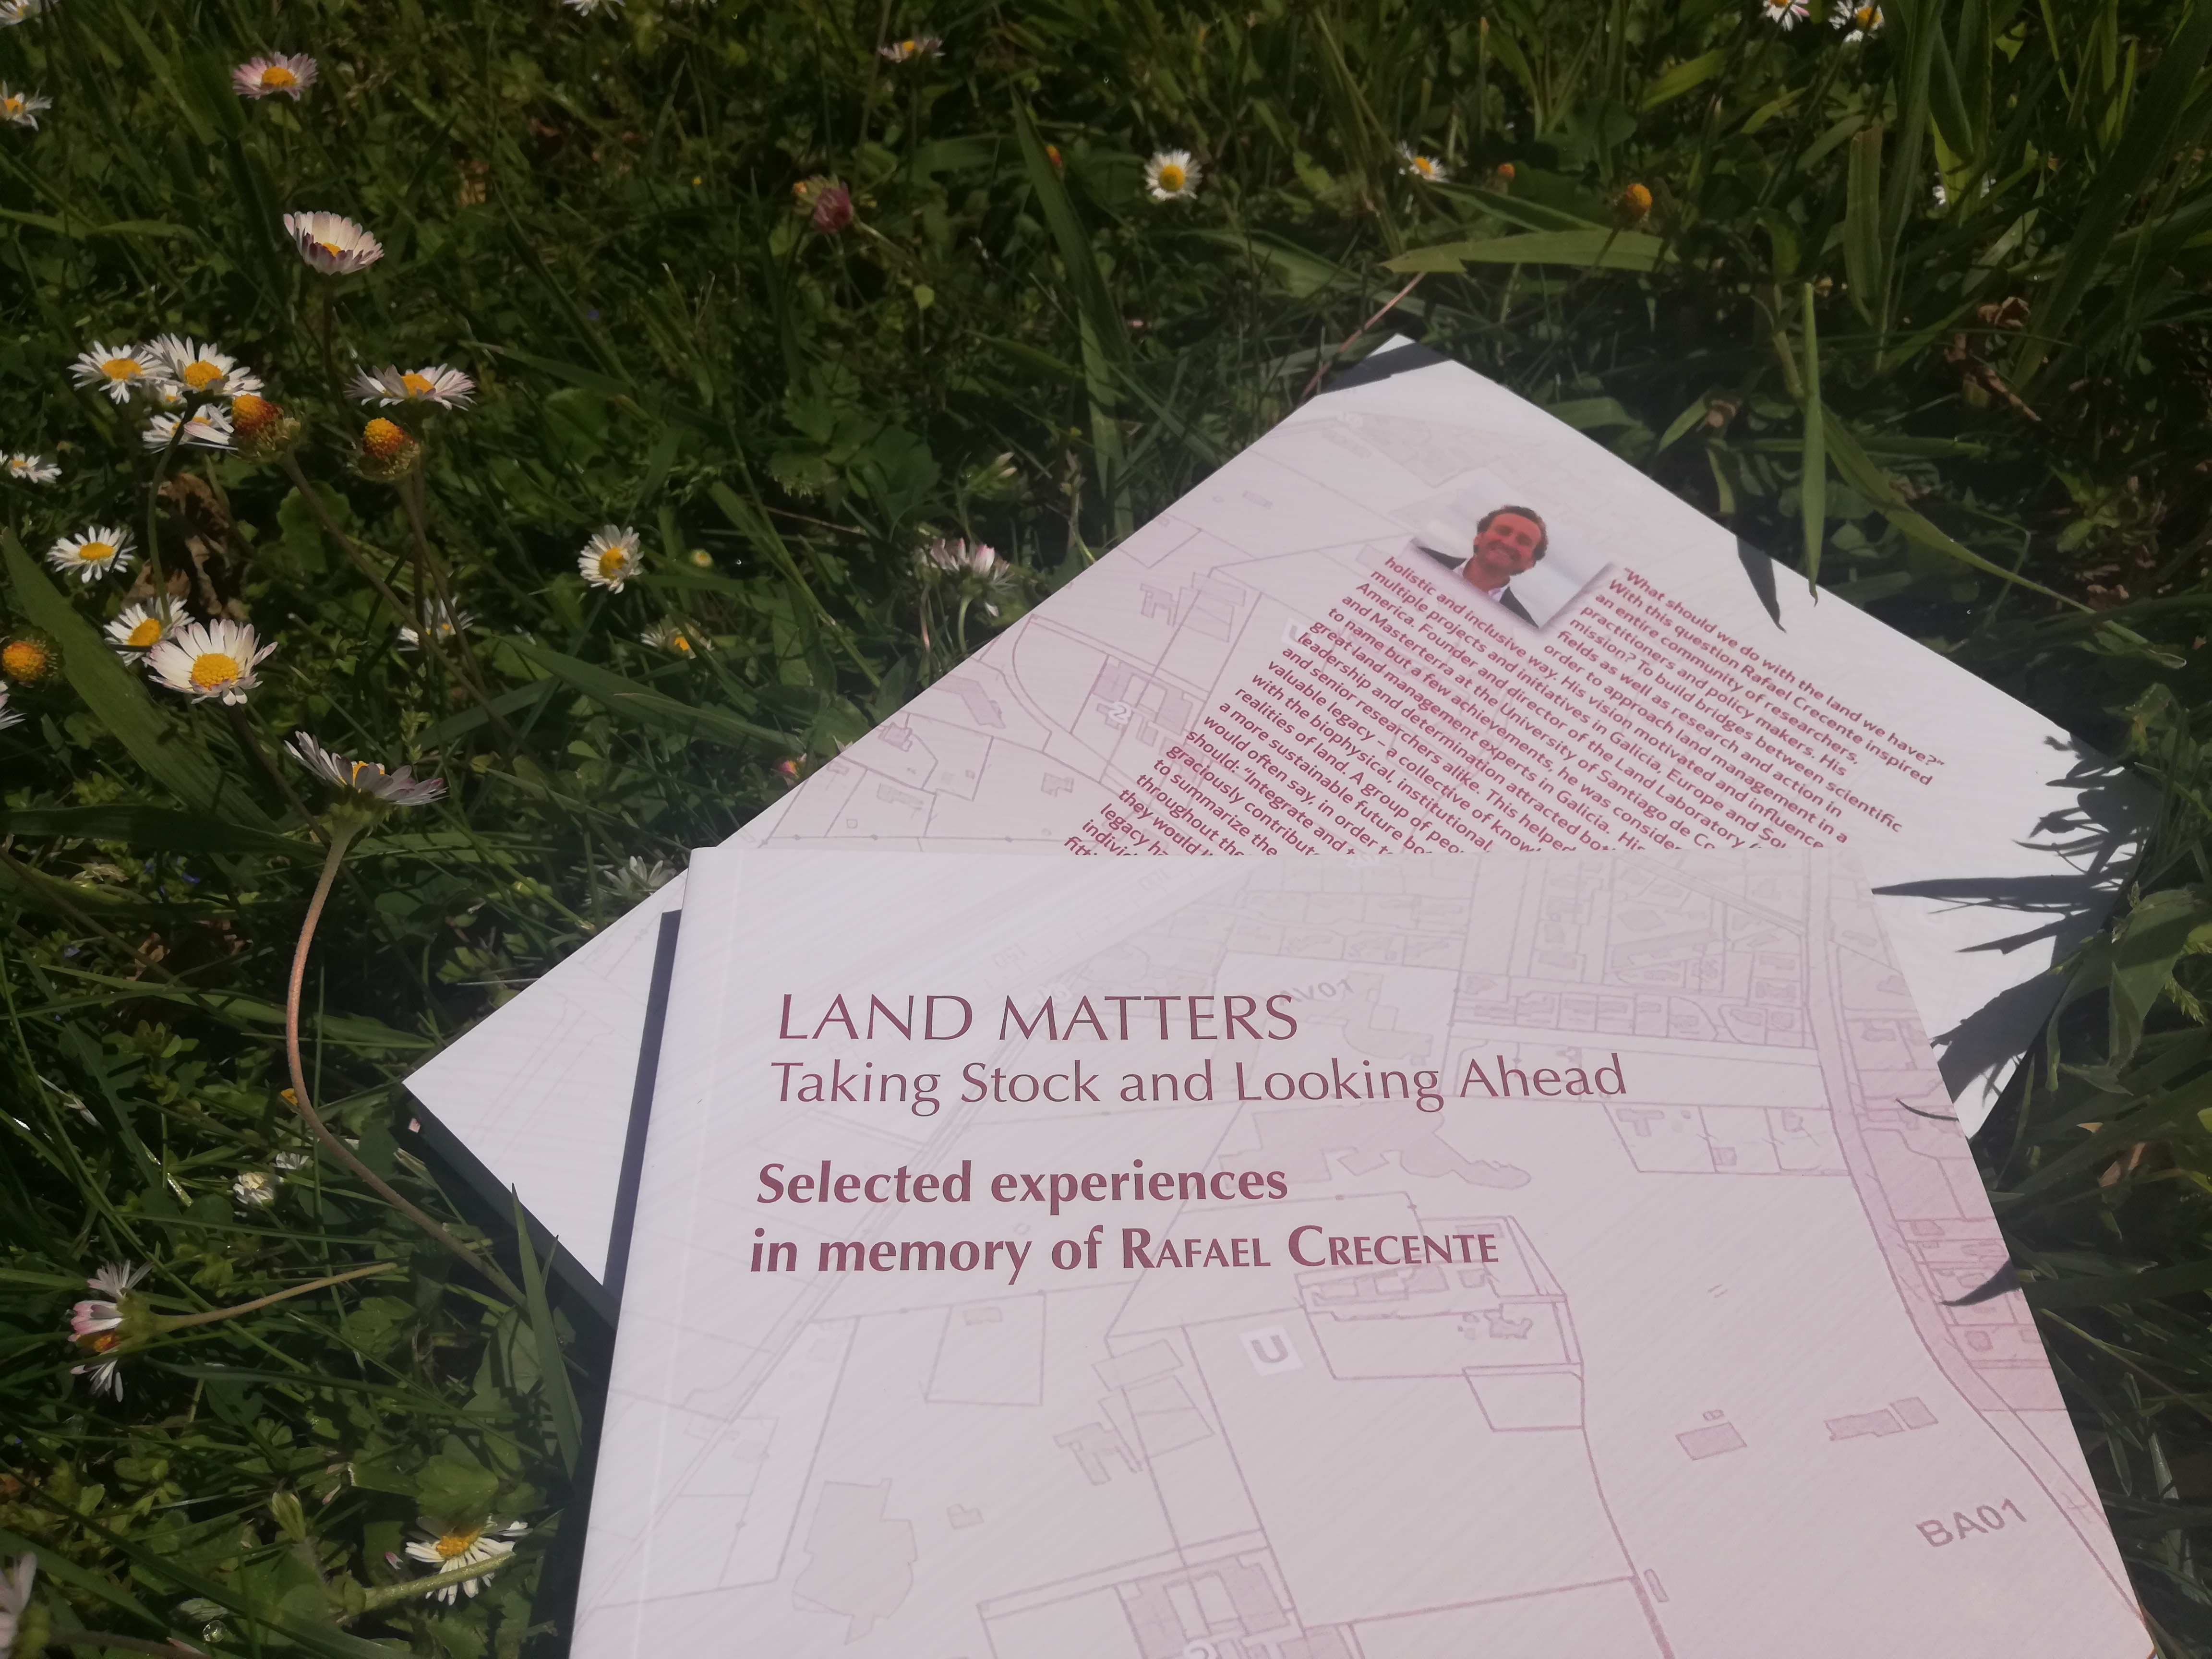 Presentation of the book ‘Land Matters”